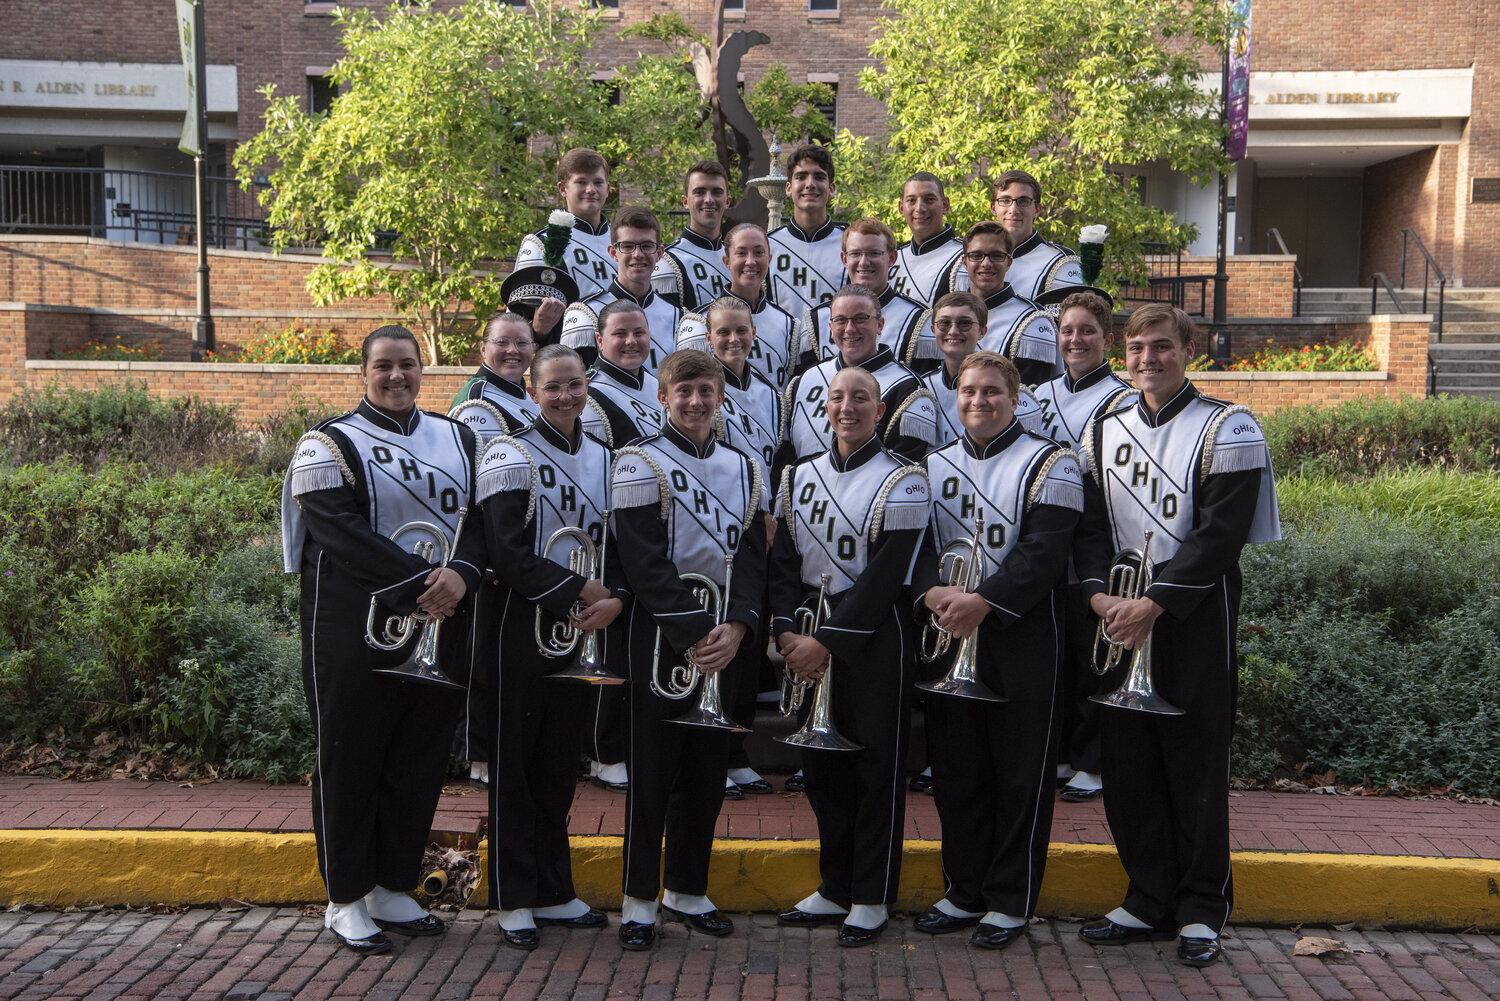 Marching 110 mellophone players